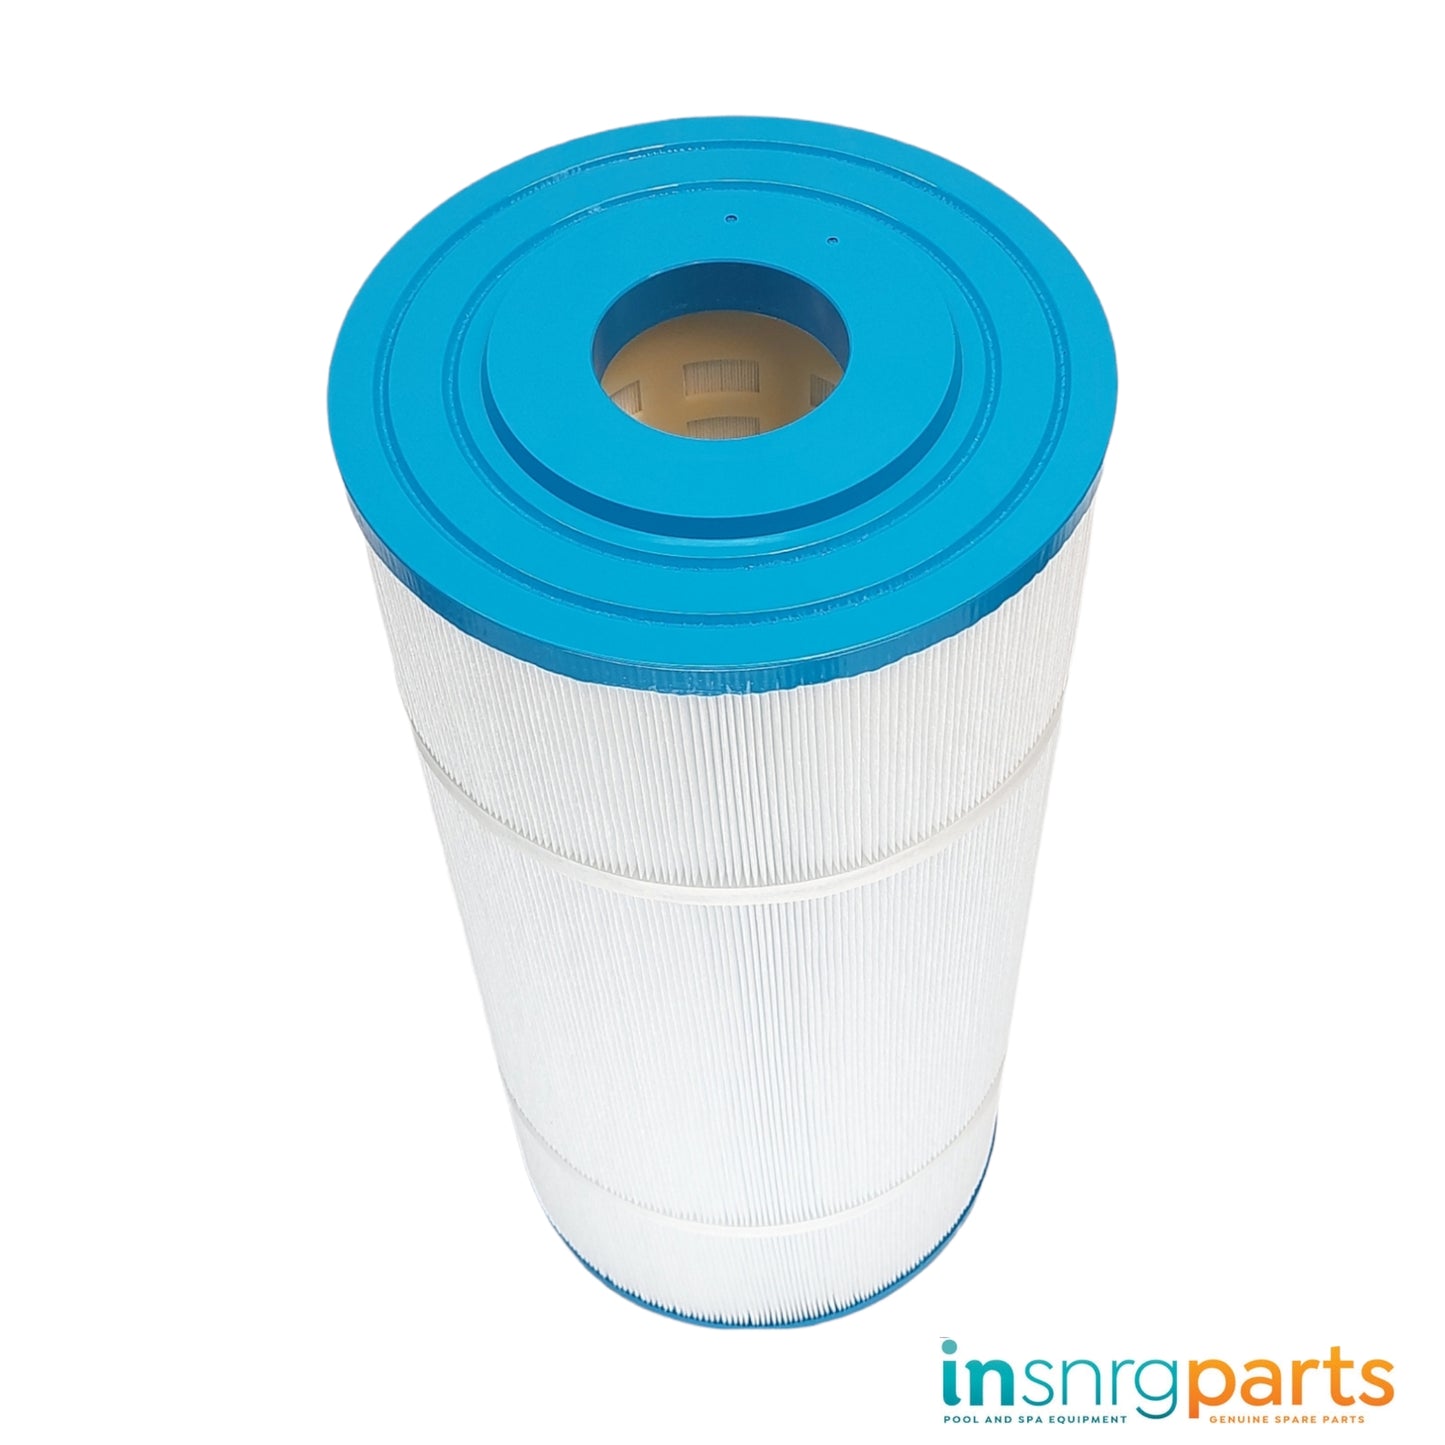 Replacement 150 Sq Ft Filter Cartridge/Element - Insnrg Ci150 Cartridge Filter [16129992]